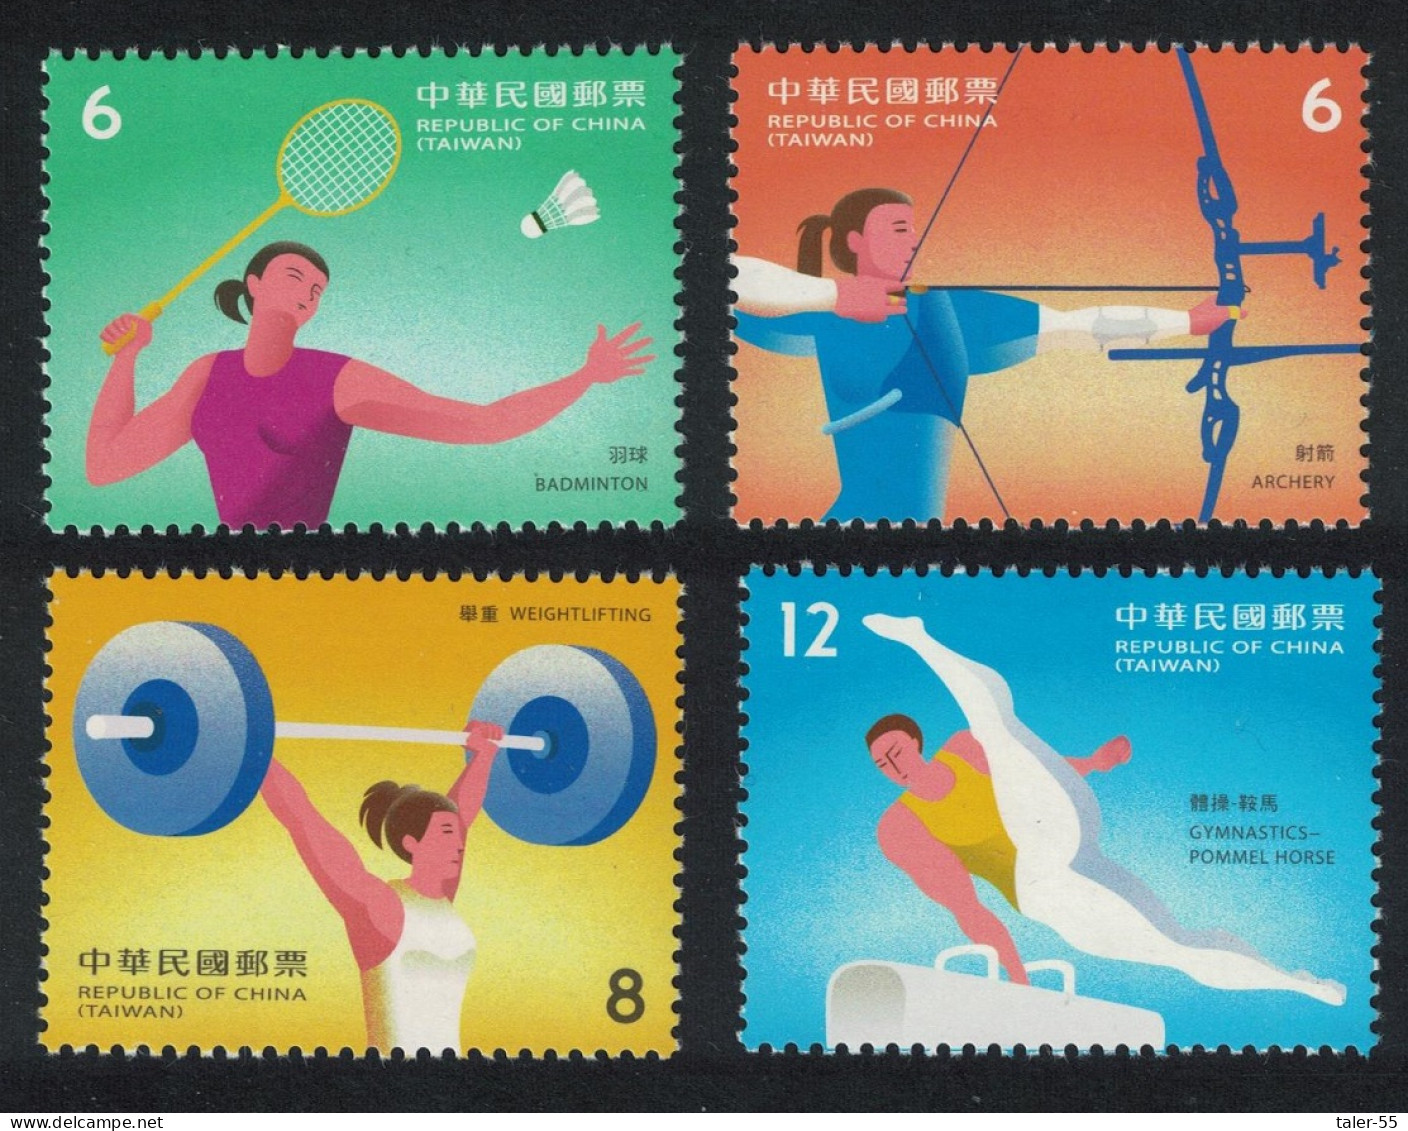 Taiwan Badminton Archery Weightlifting Sports 4v 2020 MNH - Unused Stamps